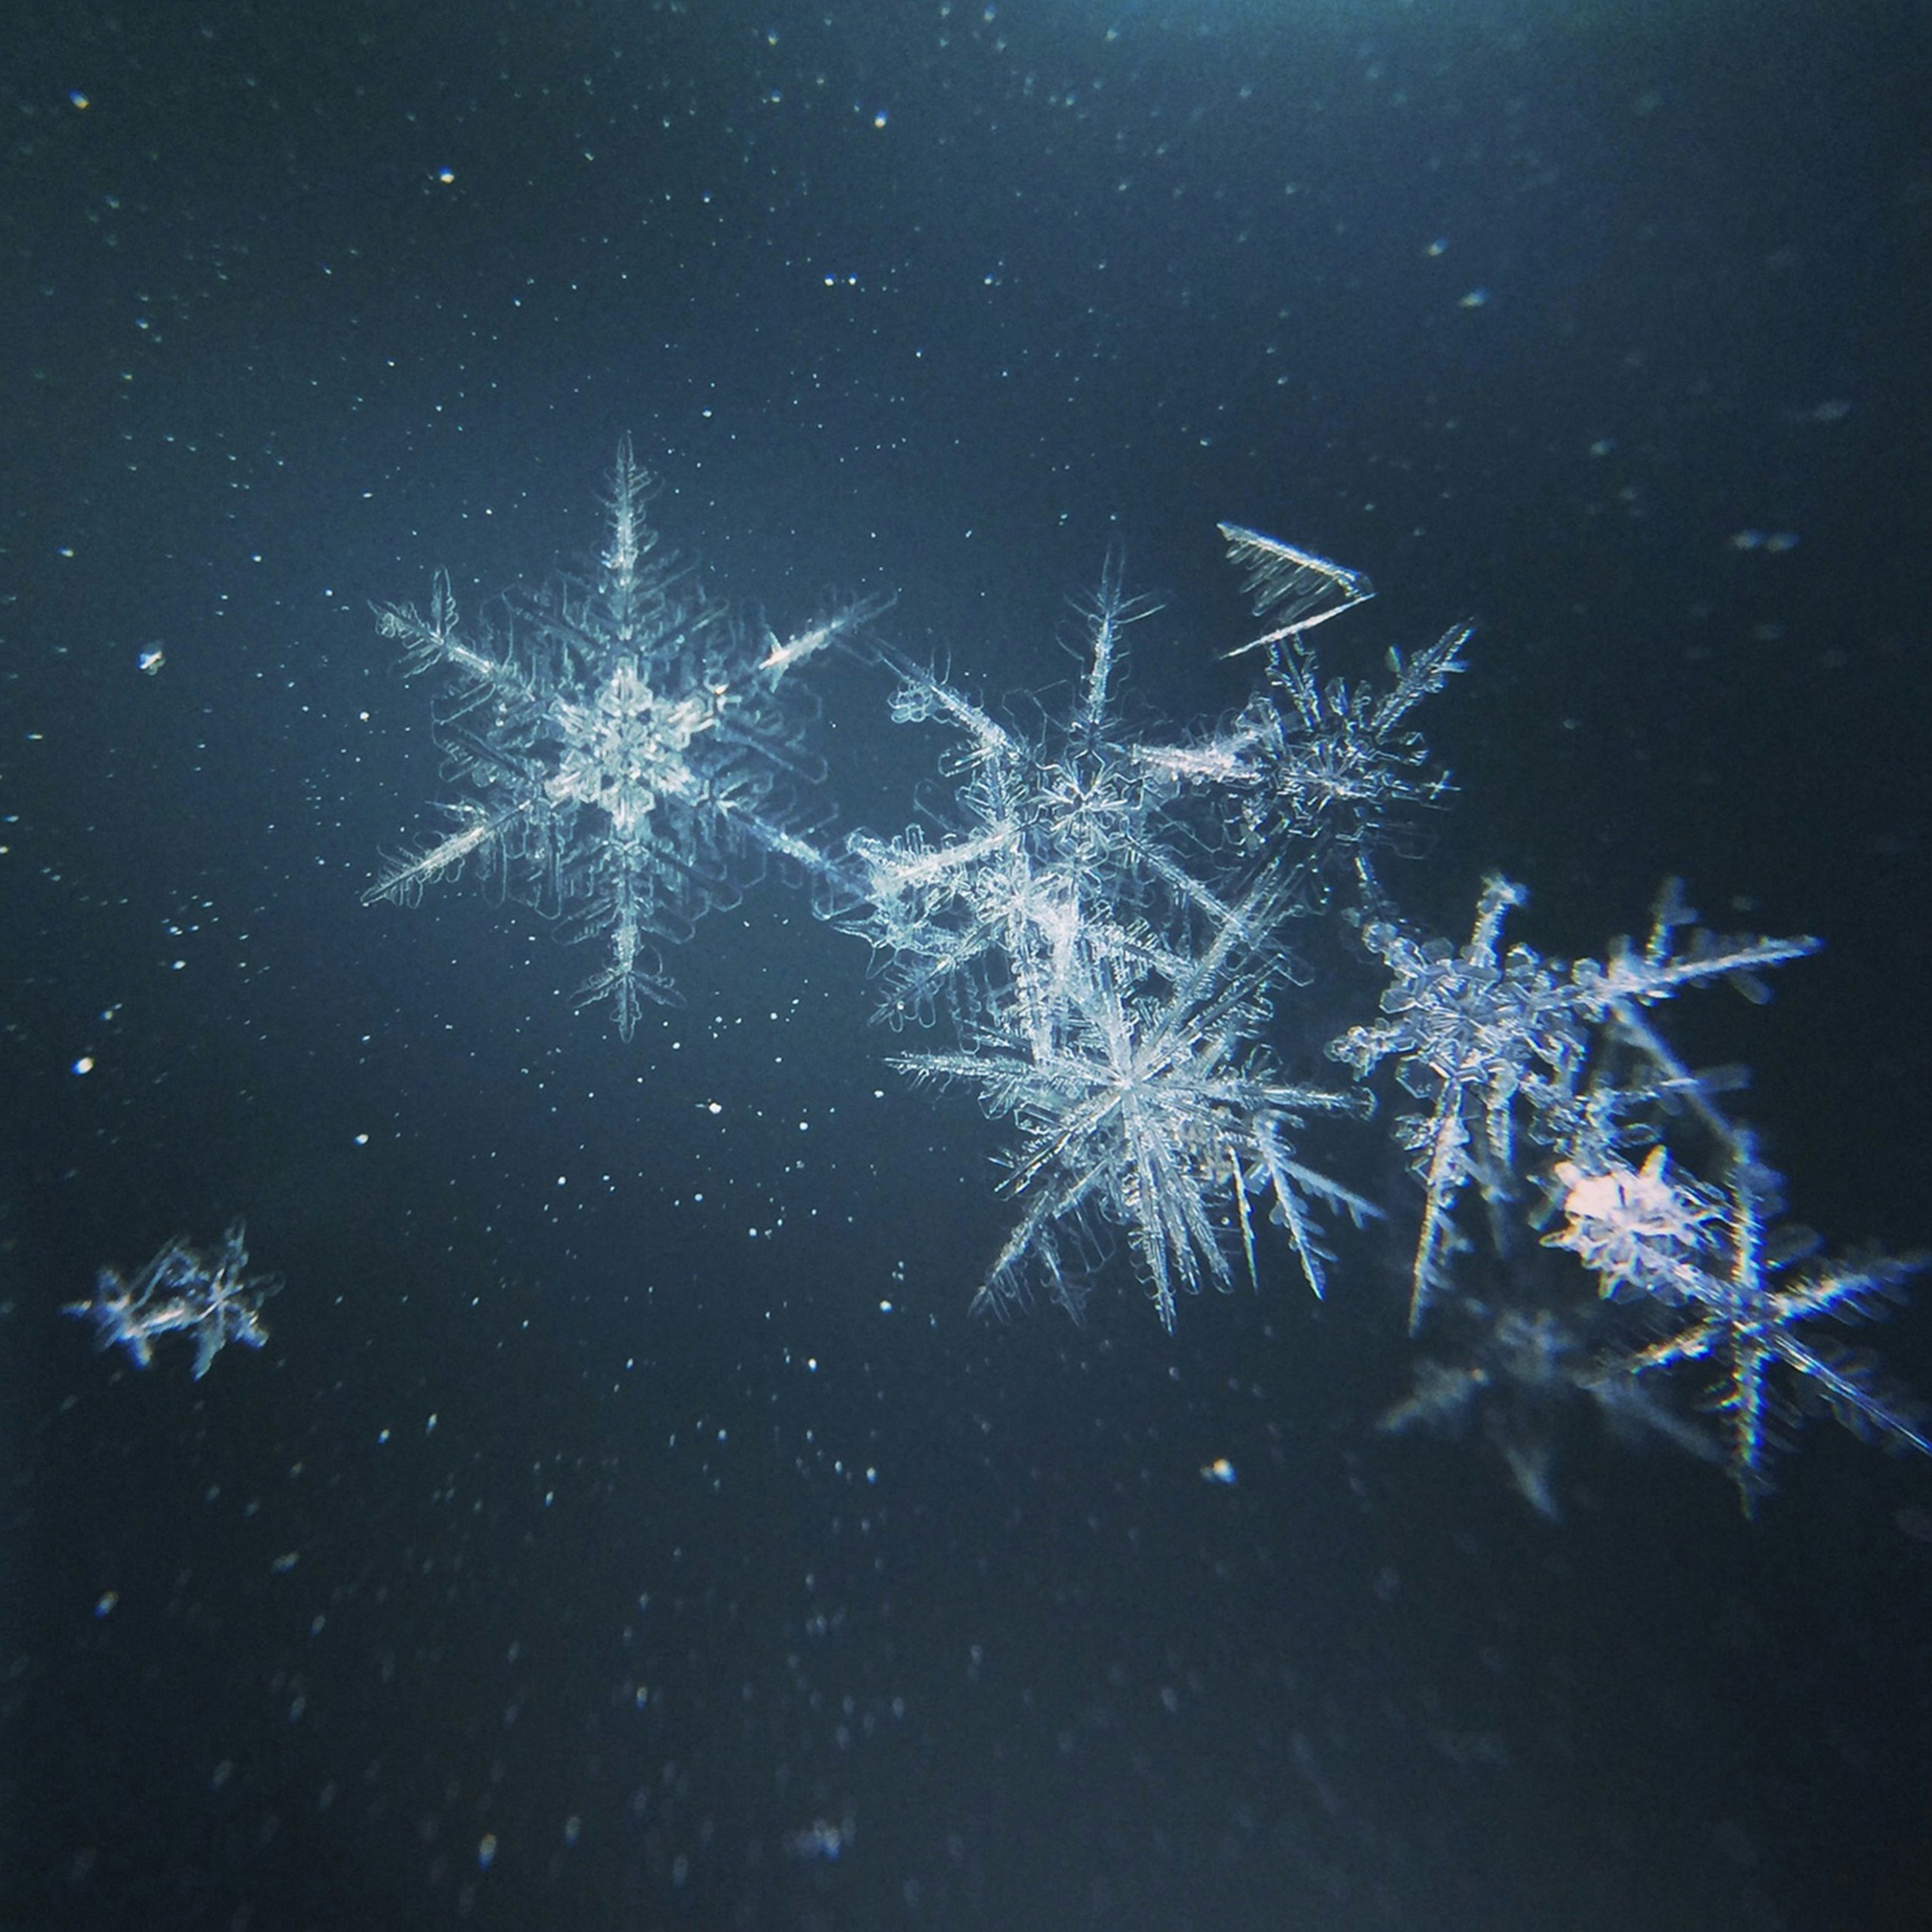 A close up photograph of snowflakes.